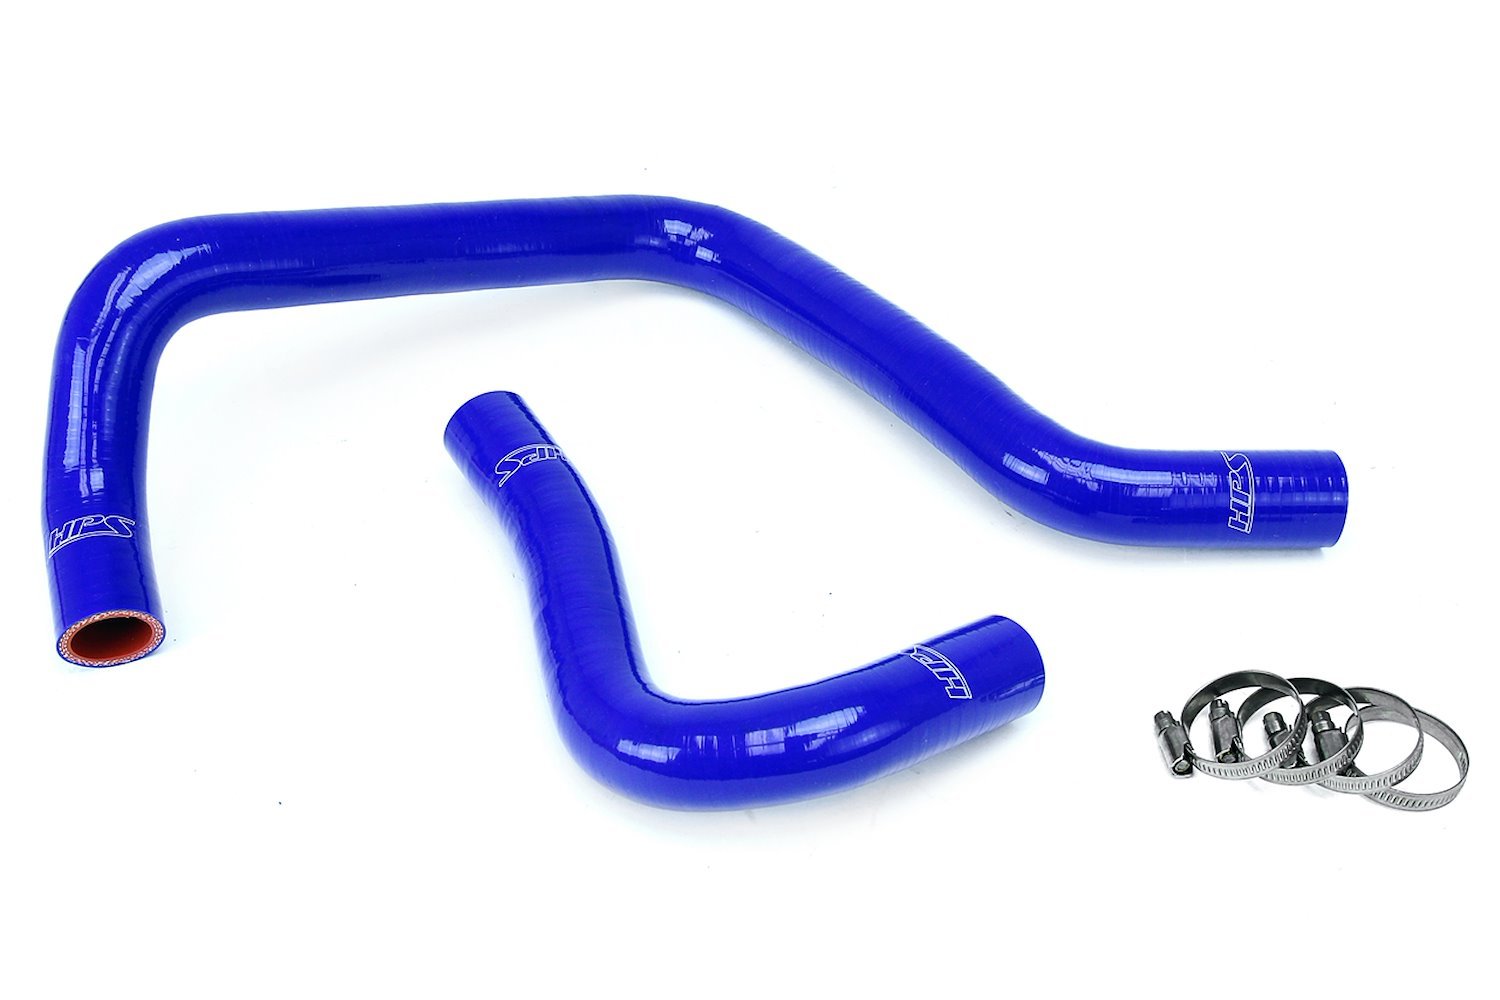 57-1003-BLUE Radiator Hose Kit, High-Temp 3-Ply Reinforced Silicone, Replace OEM Rubber Radiator Coolant Hoses